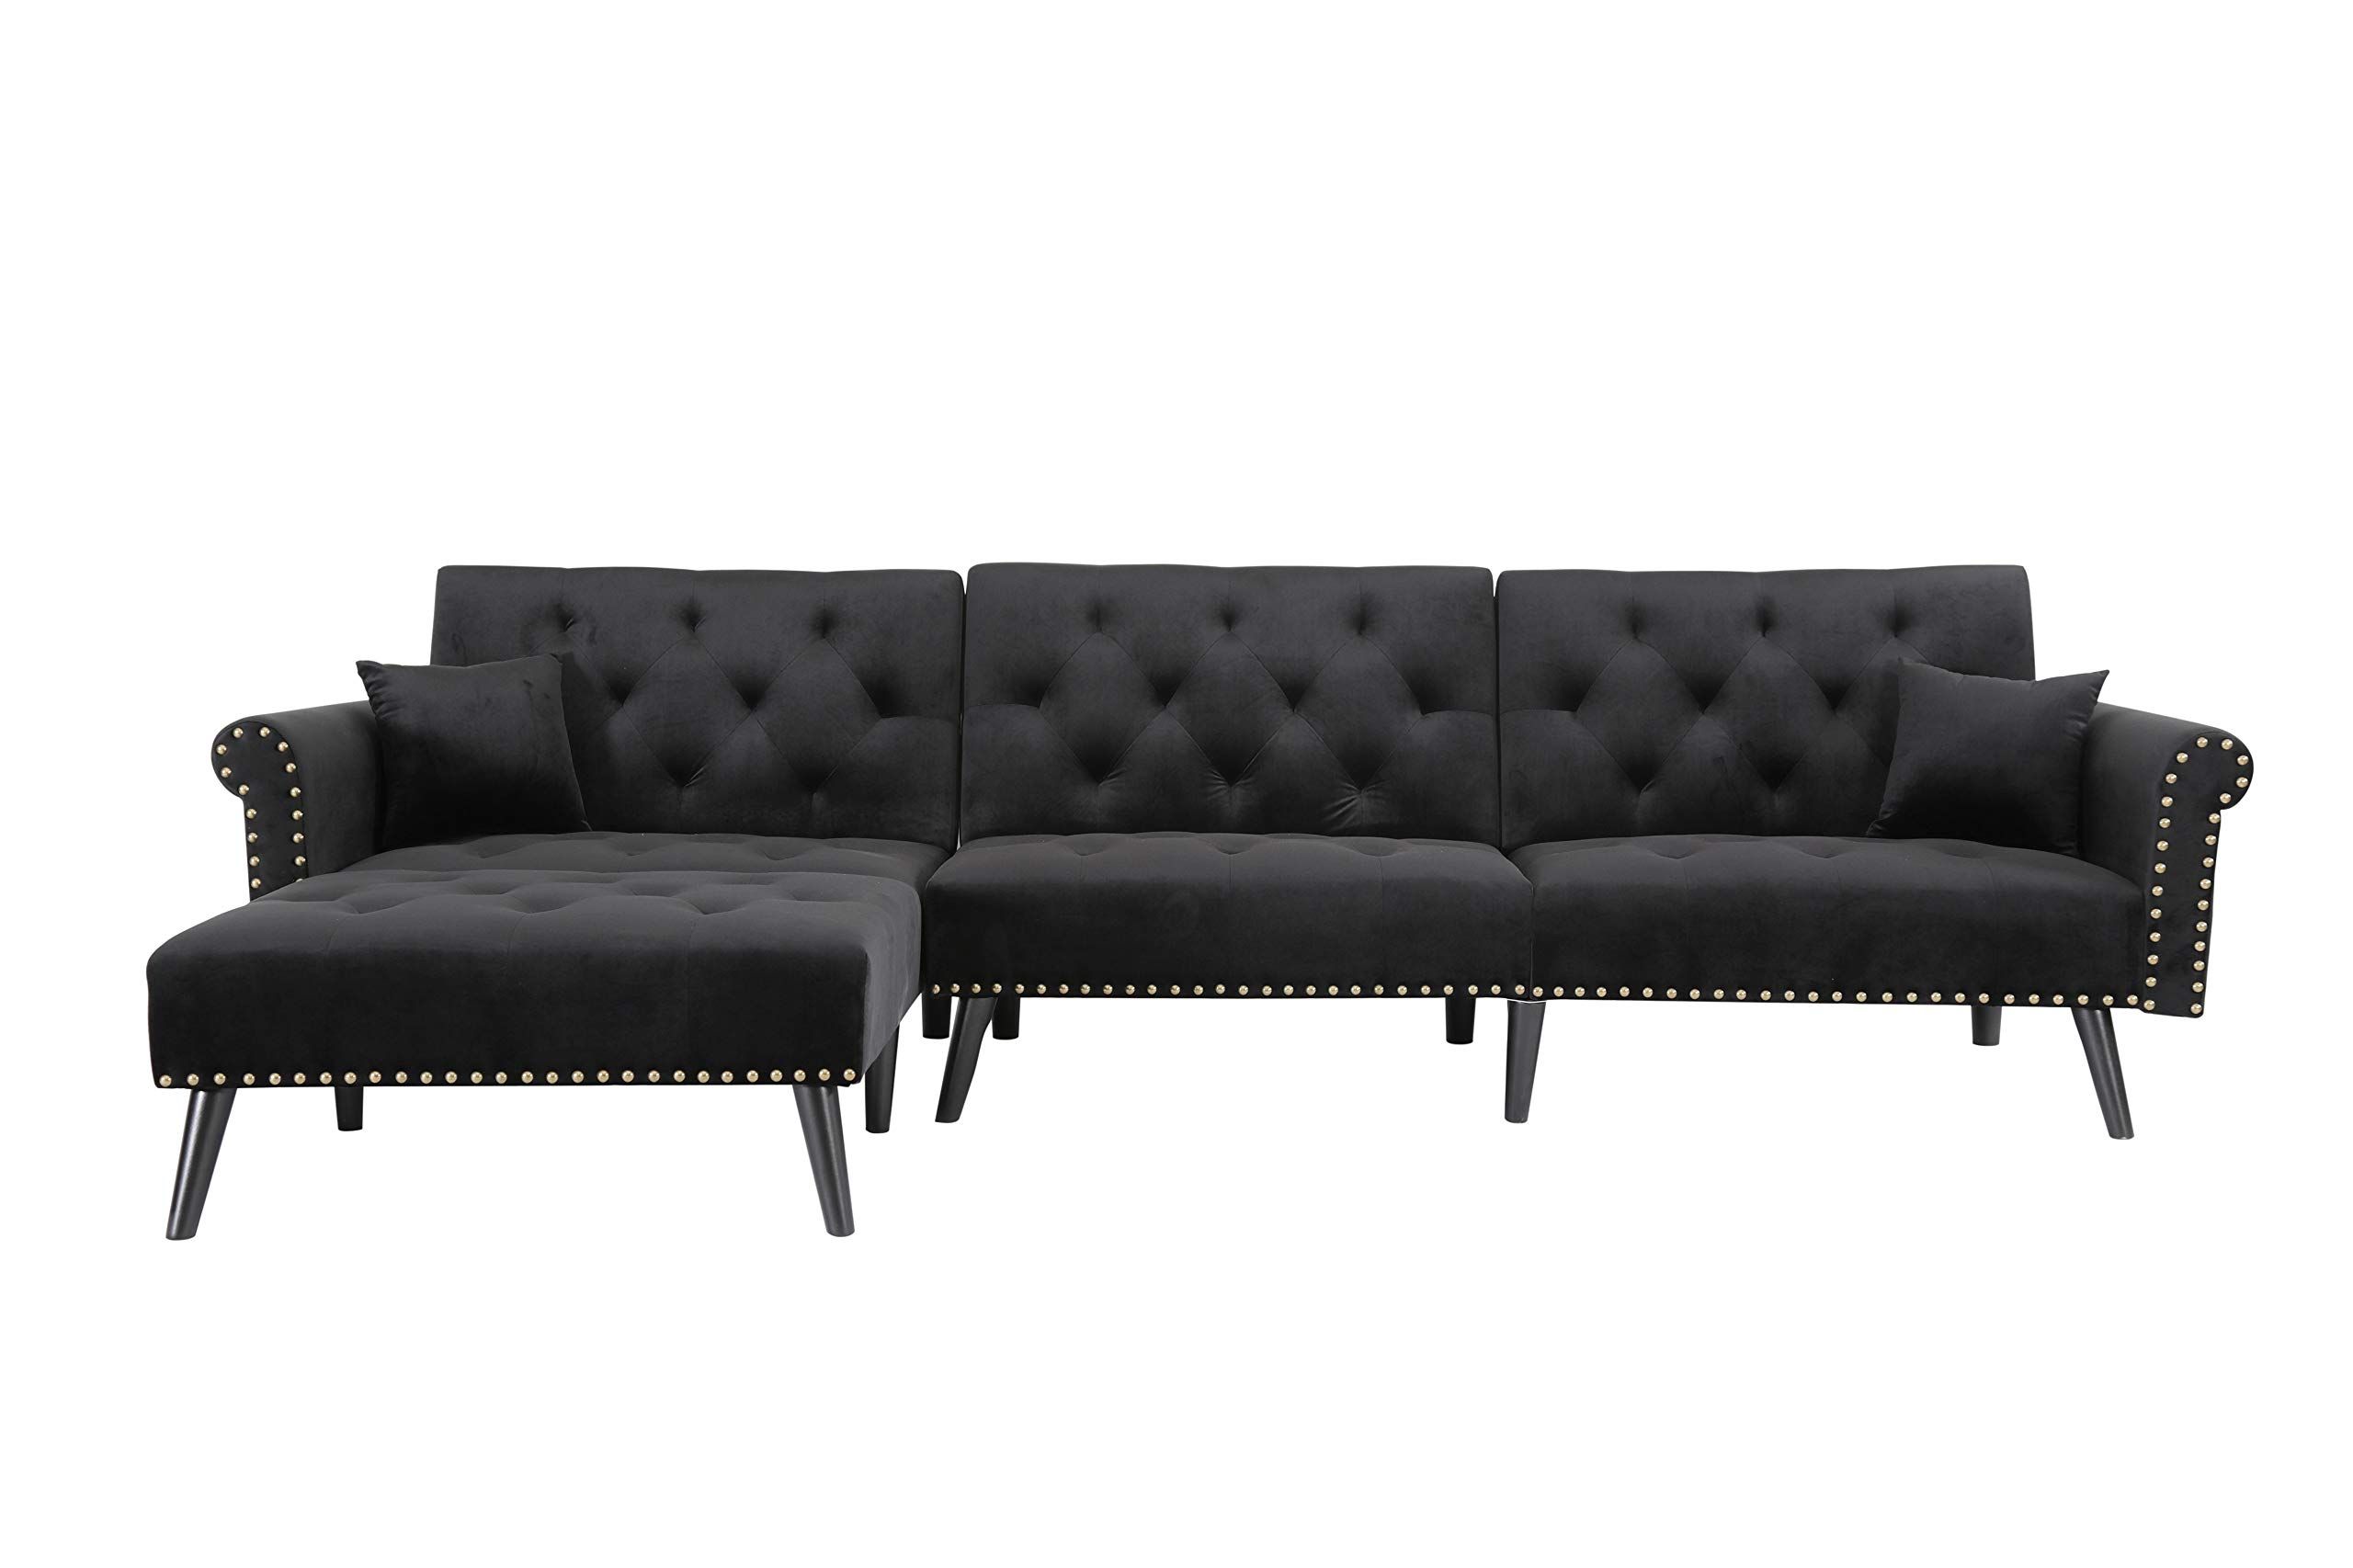 Buy Veryke Modern Velvet Sofa L Shaped Couch Chair Convertible Er Sofa With Regard To Popular 3 Seat L Shaped Sofas In Black (View 5 of 15)